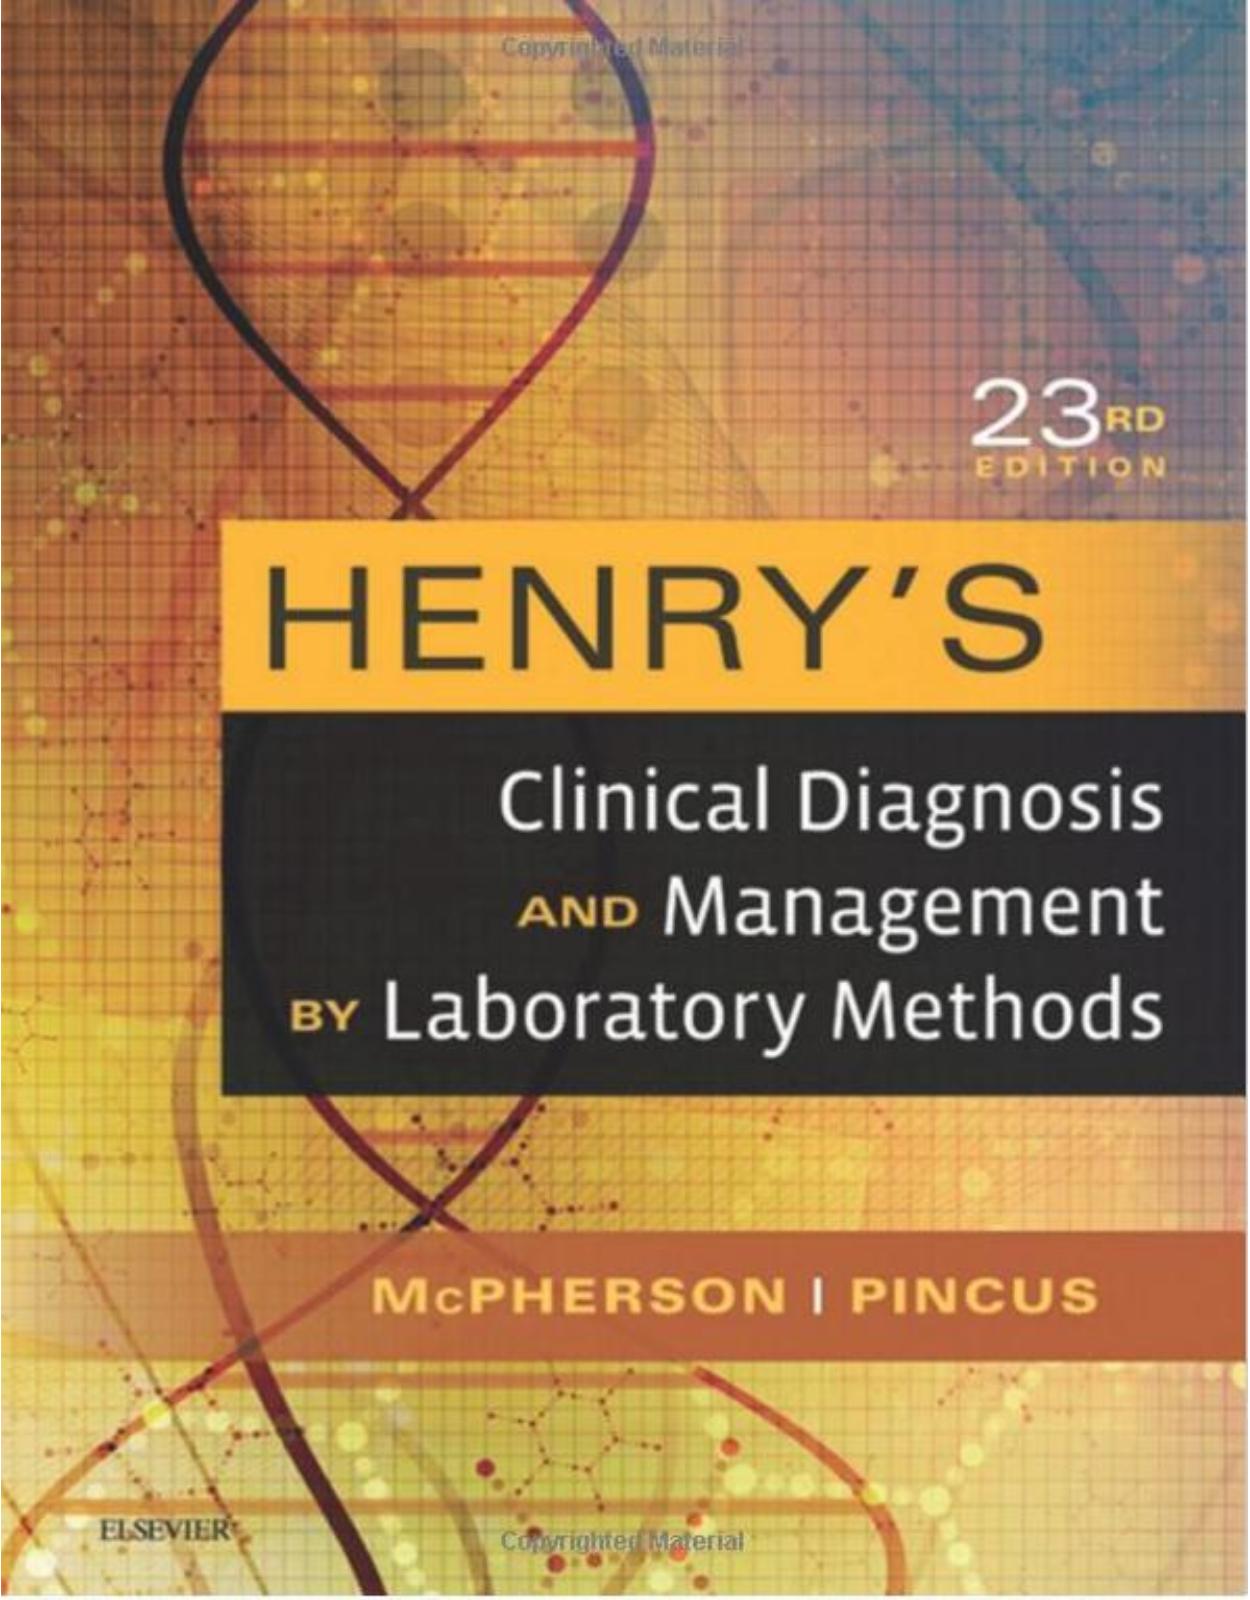 Henry's Clinical Diagnosis and Management by Laboratory Methods, 23rd Edition 